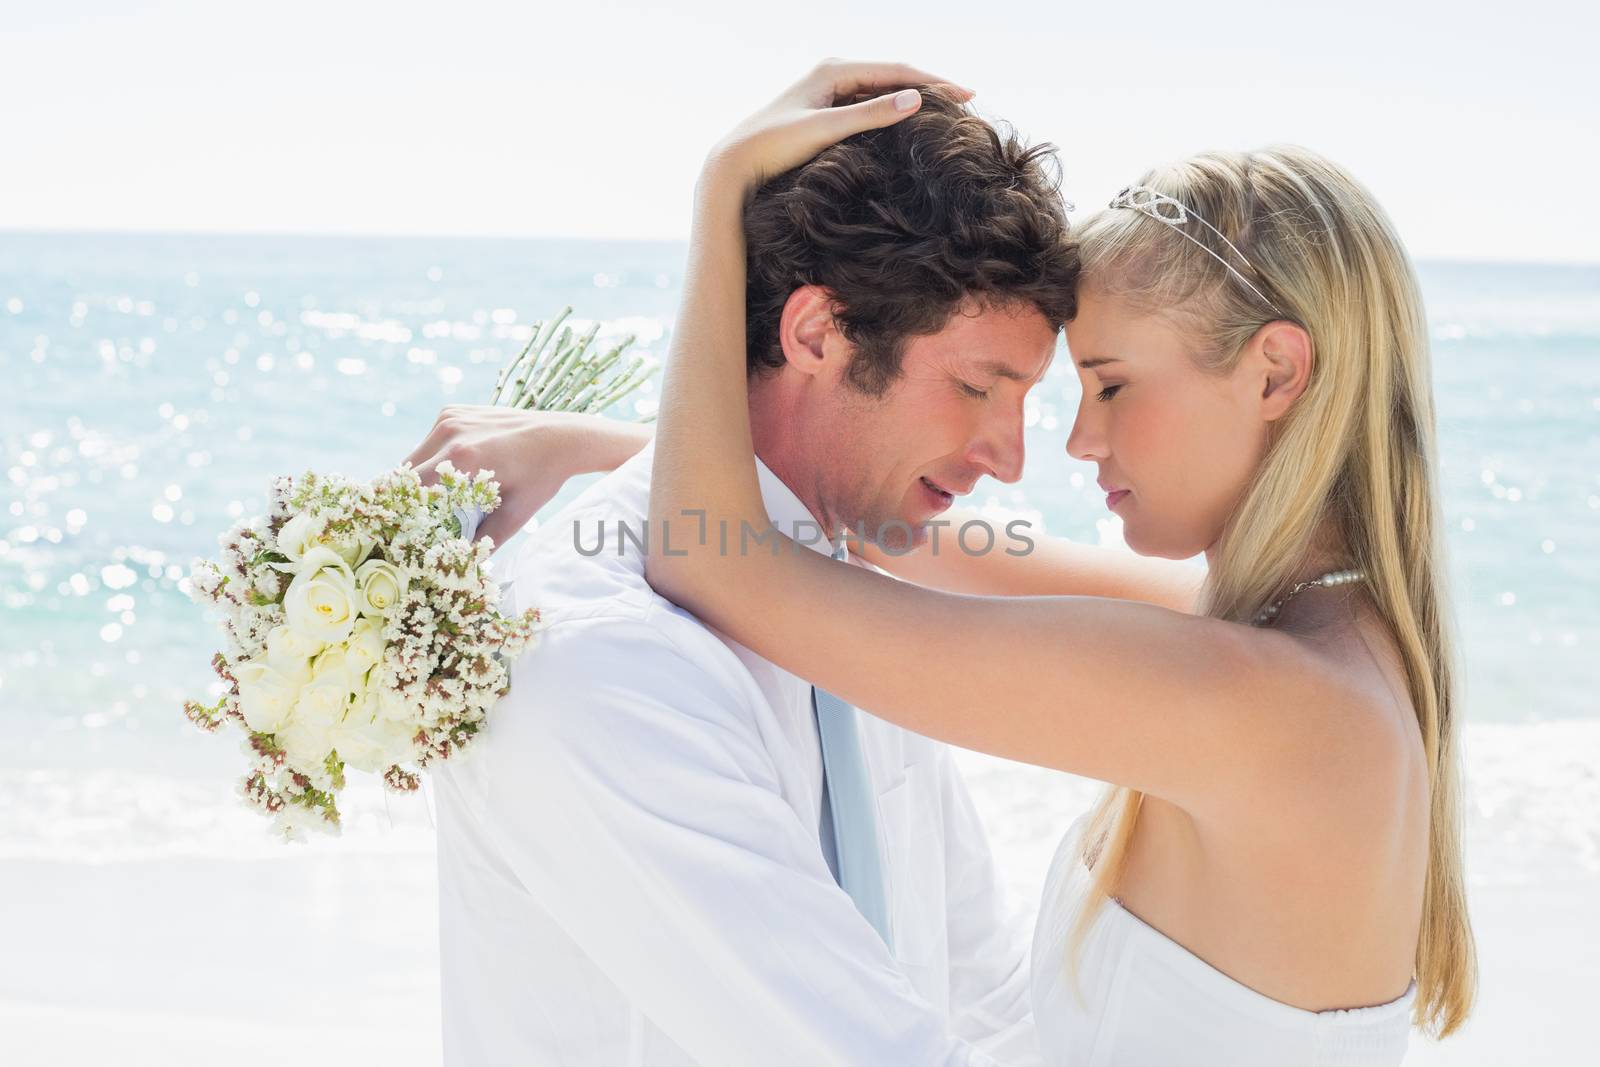 Romantic couple embracing on their wedding day by Wavebreakmedia